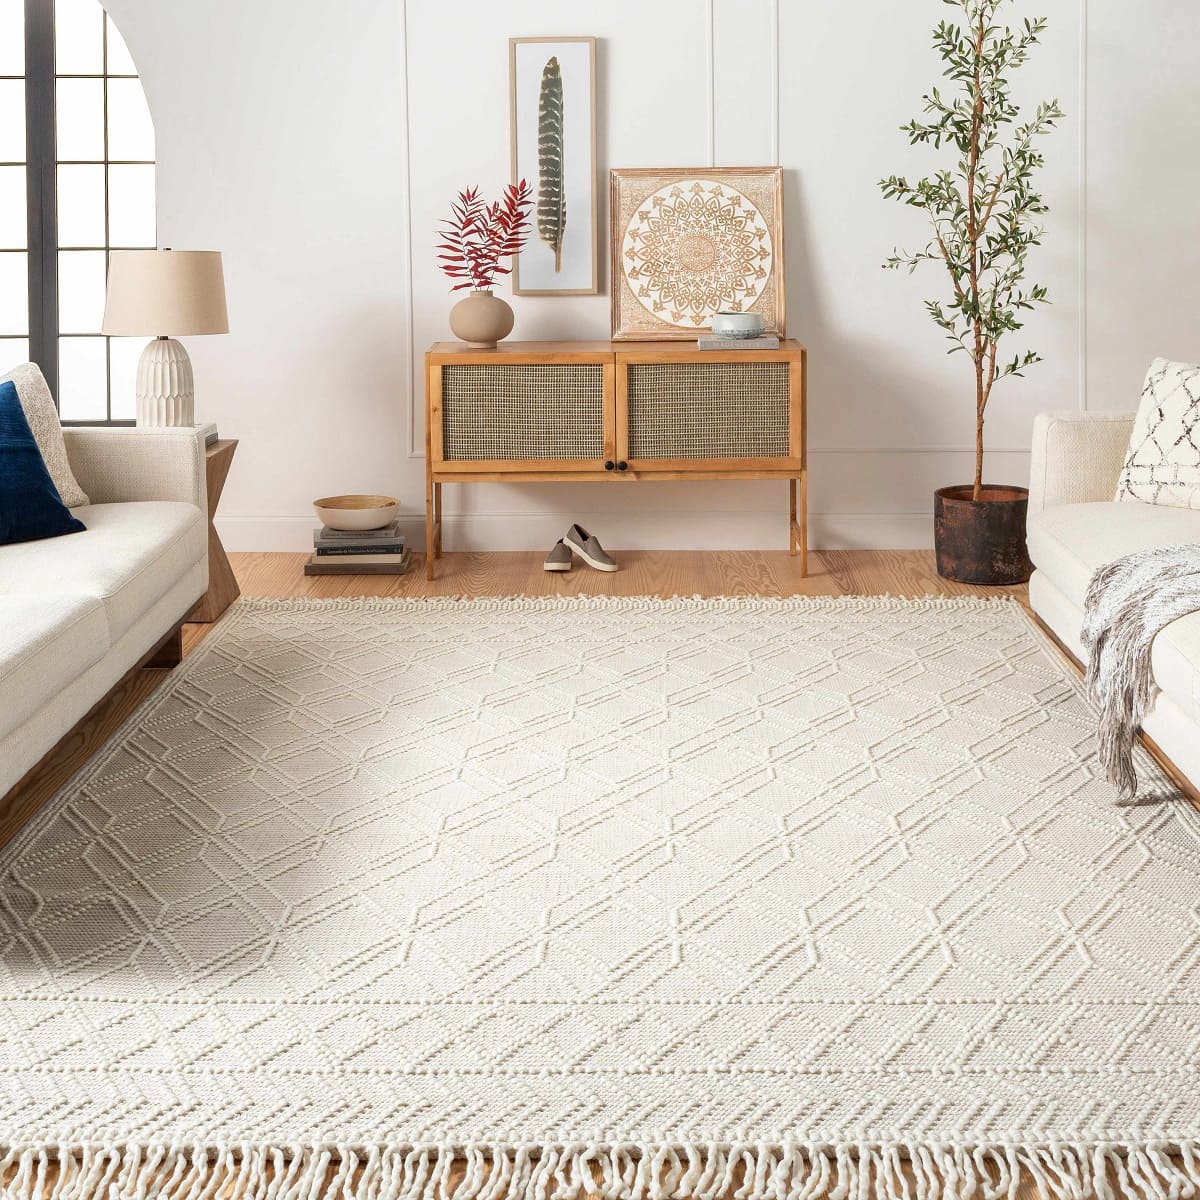 How To Clean A Wool Rug: An Expert Guide